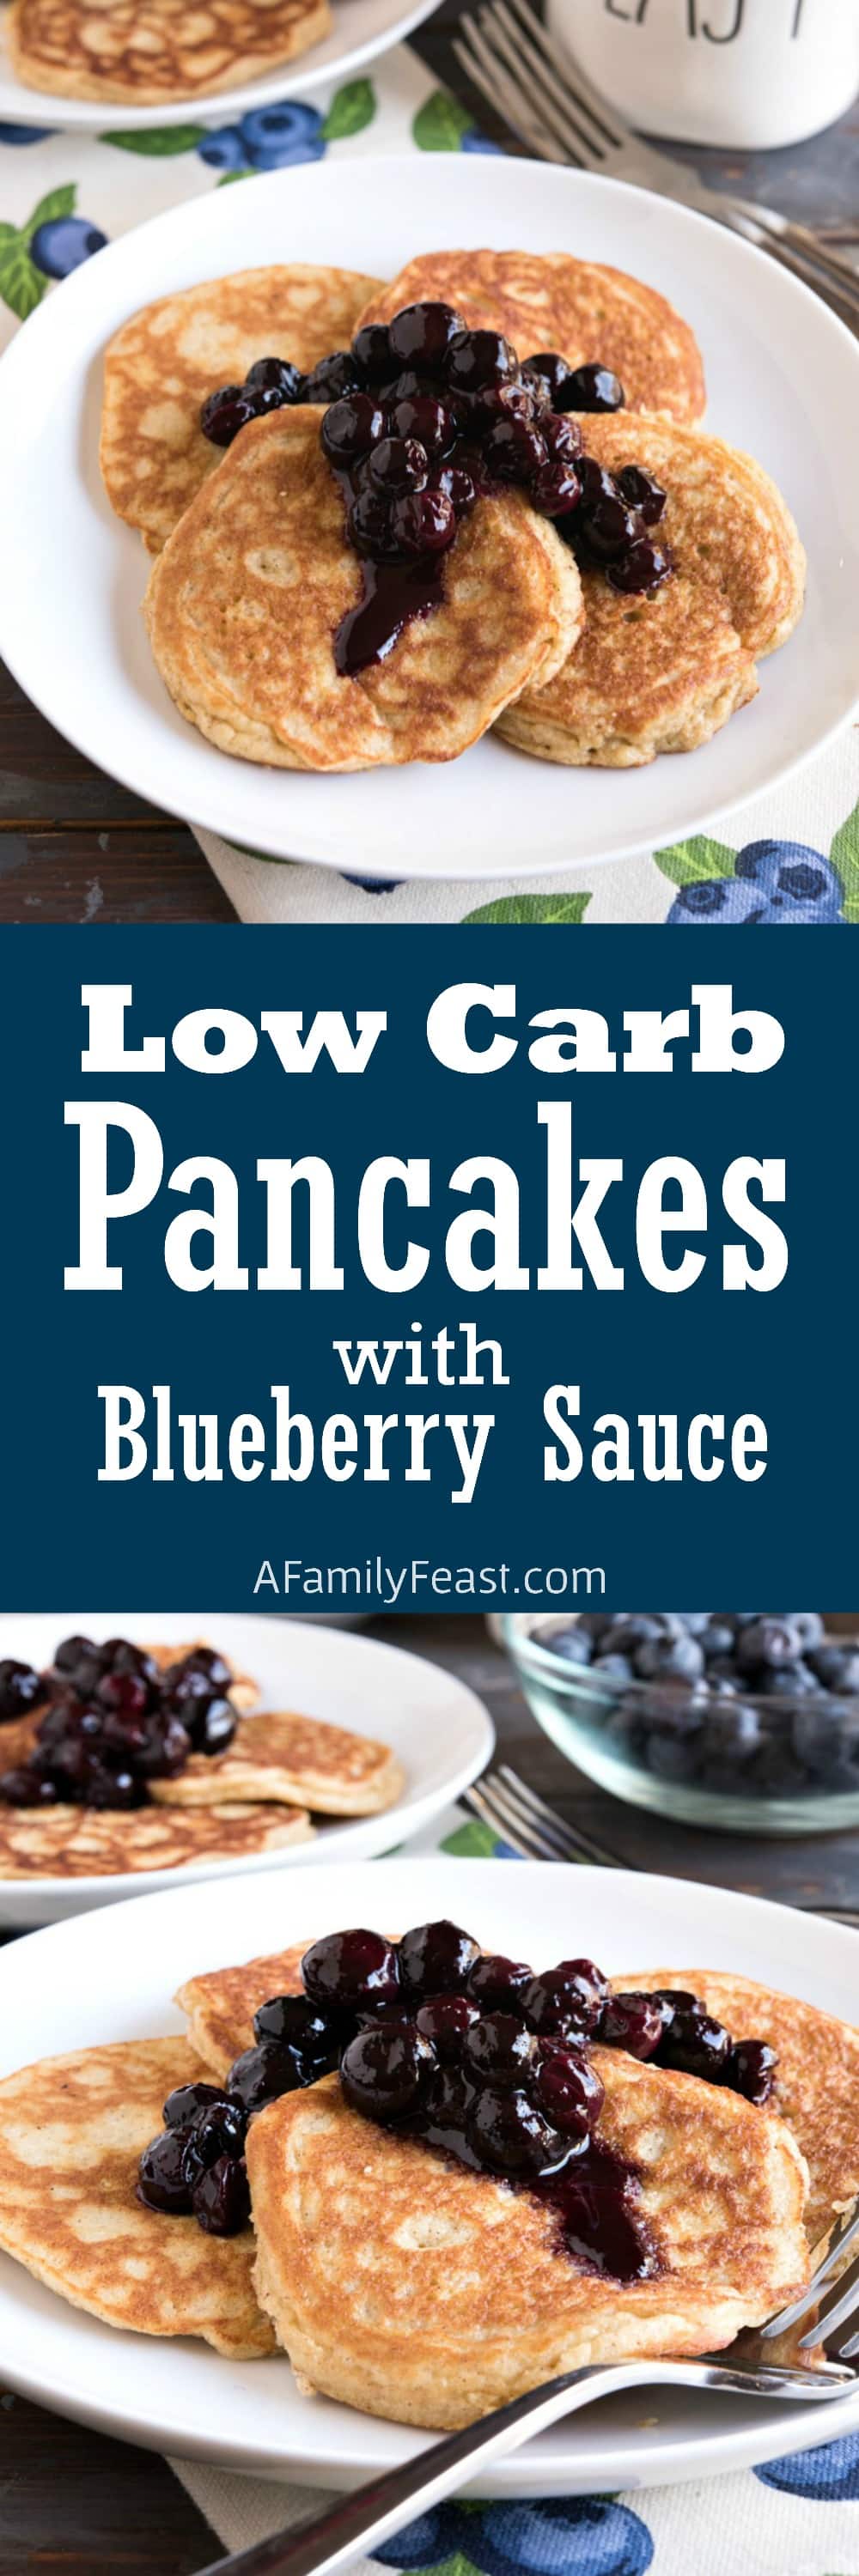 These Low Carb Pancakes with Blueberry Sauce are light, fluffy and delicious!